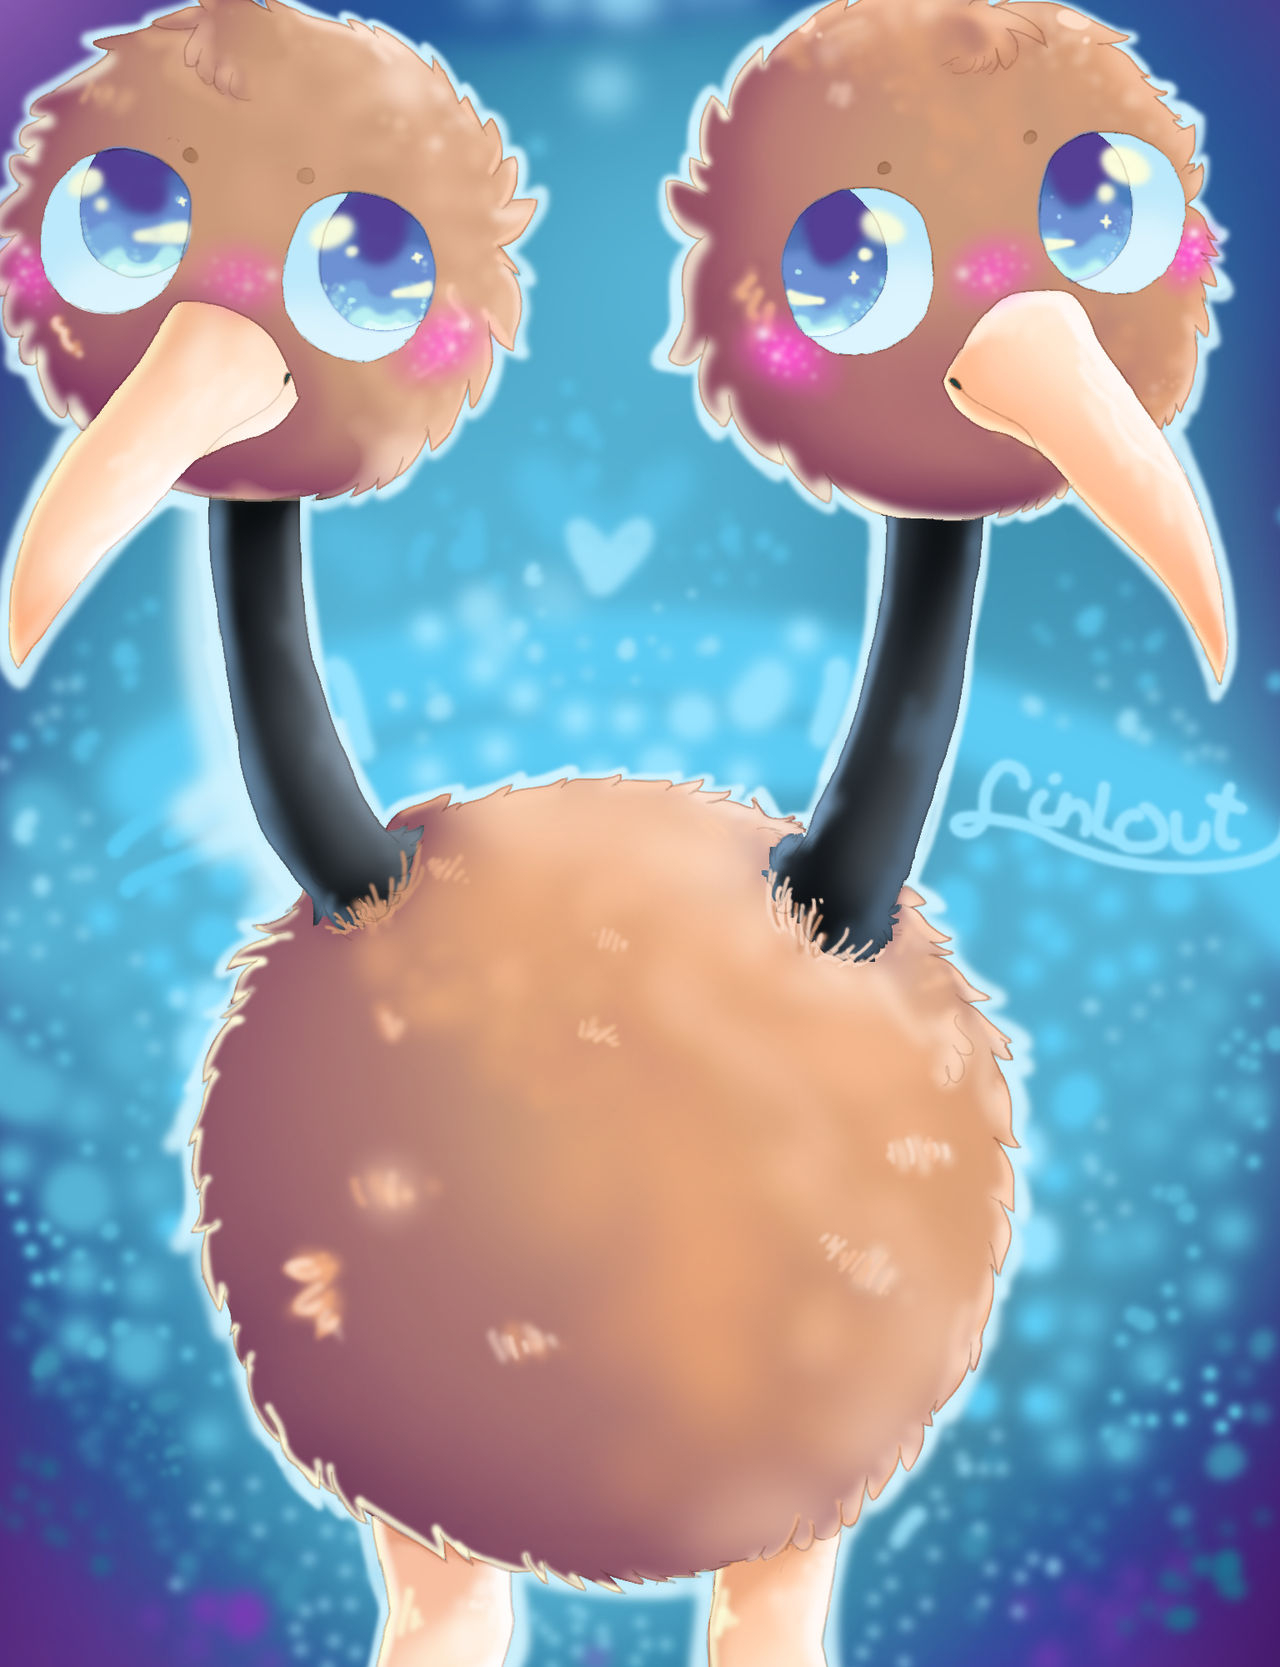 doduo_by_linlout23_ddr1xii-fullview.jpg